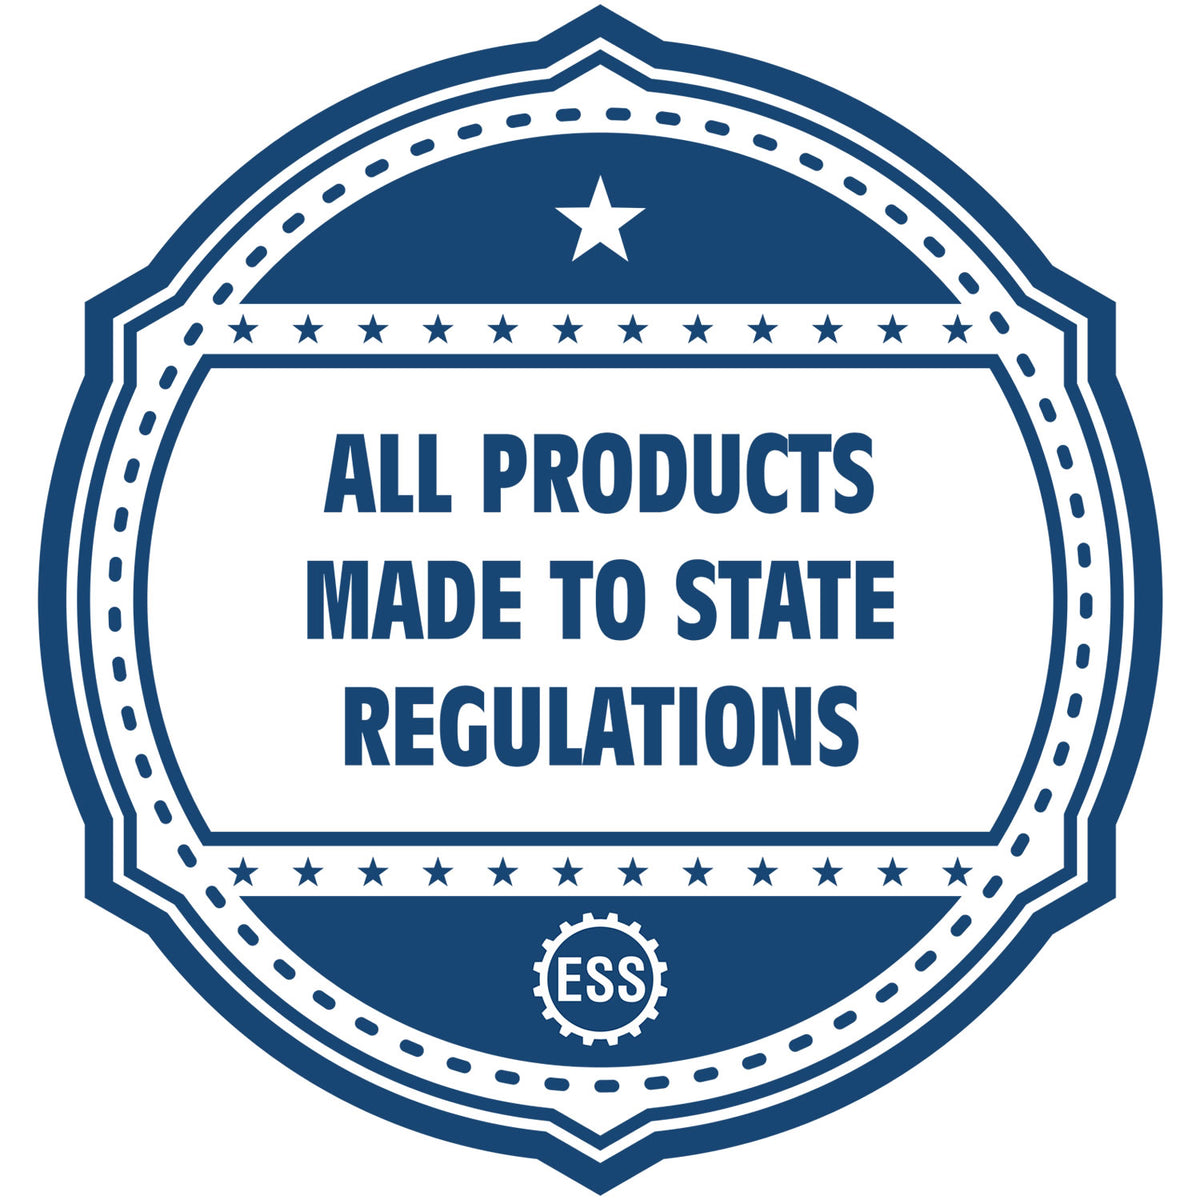 An icon or badge element for the Self-Inking State Seal Vermont Notary Stamp showing that this product is made in compliance with state regulations.